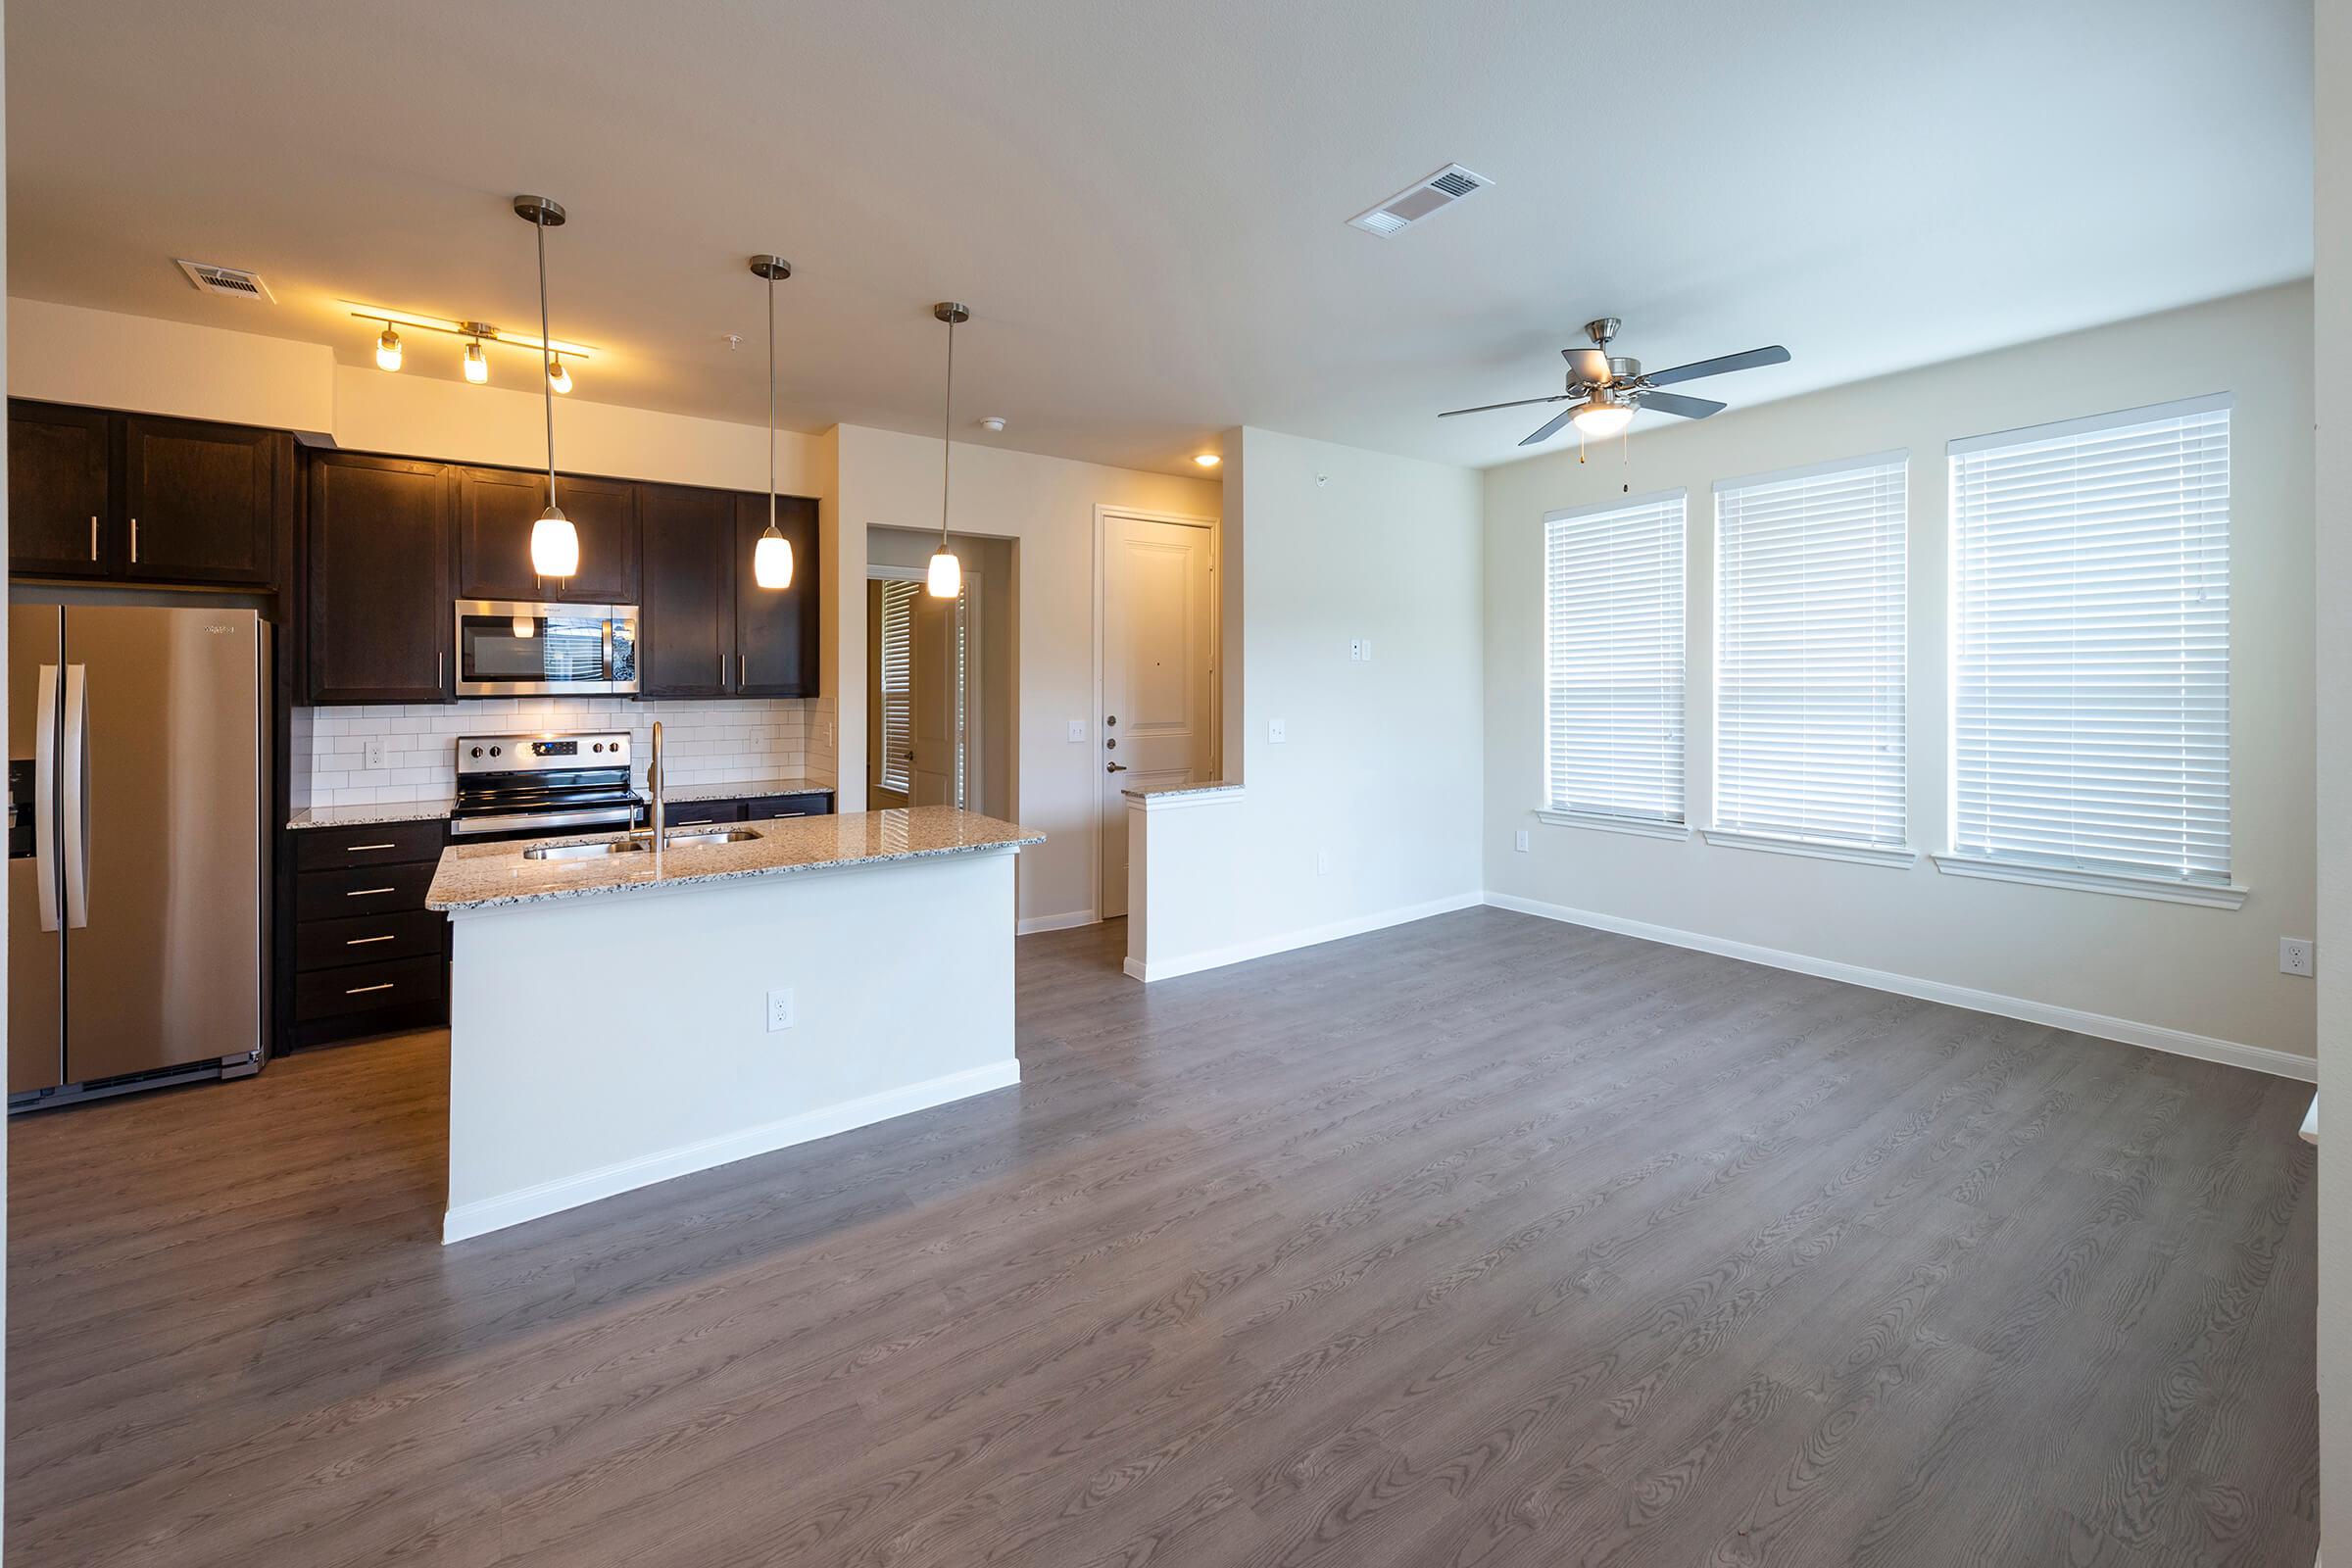 BRIGHT AND INVITING LIVING SPACE AT THE RESERVE AT CITY PLACE IN CONROE, TEXAS